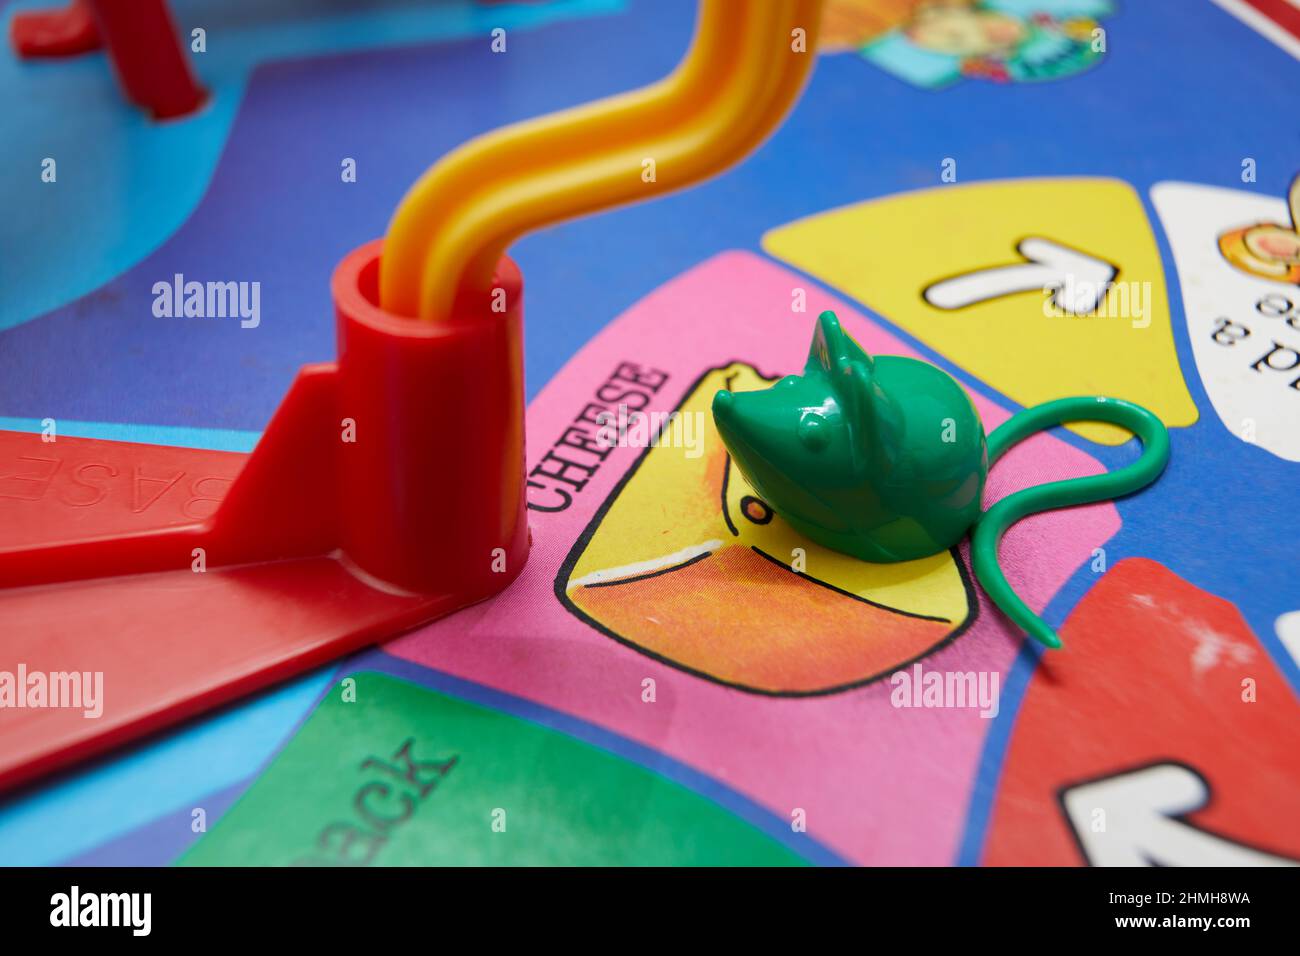 https://c8.alamy.com/comp/2HMH8WA/close-up-photograph-of-playing-pieces-on-a-mouse-trap-board-game-2HMH8WA.jpg